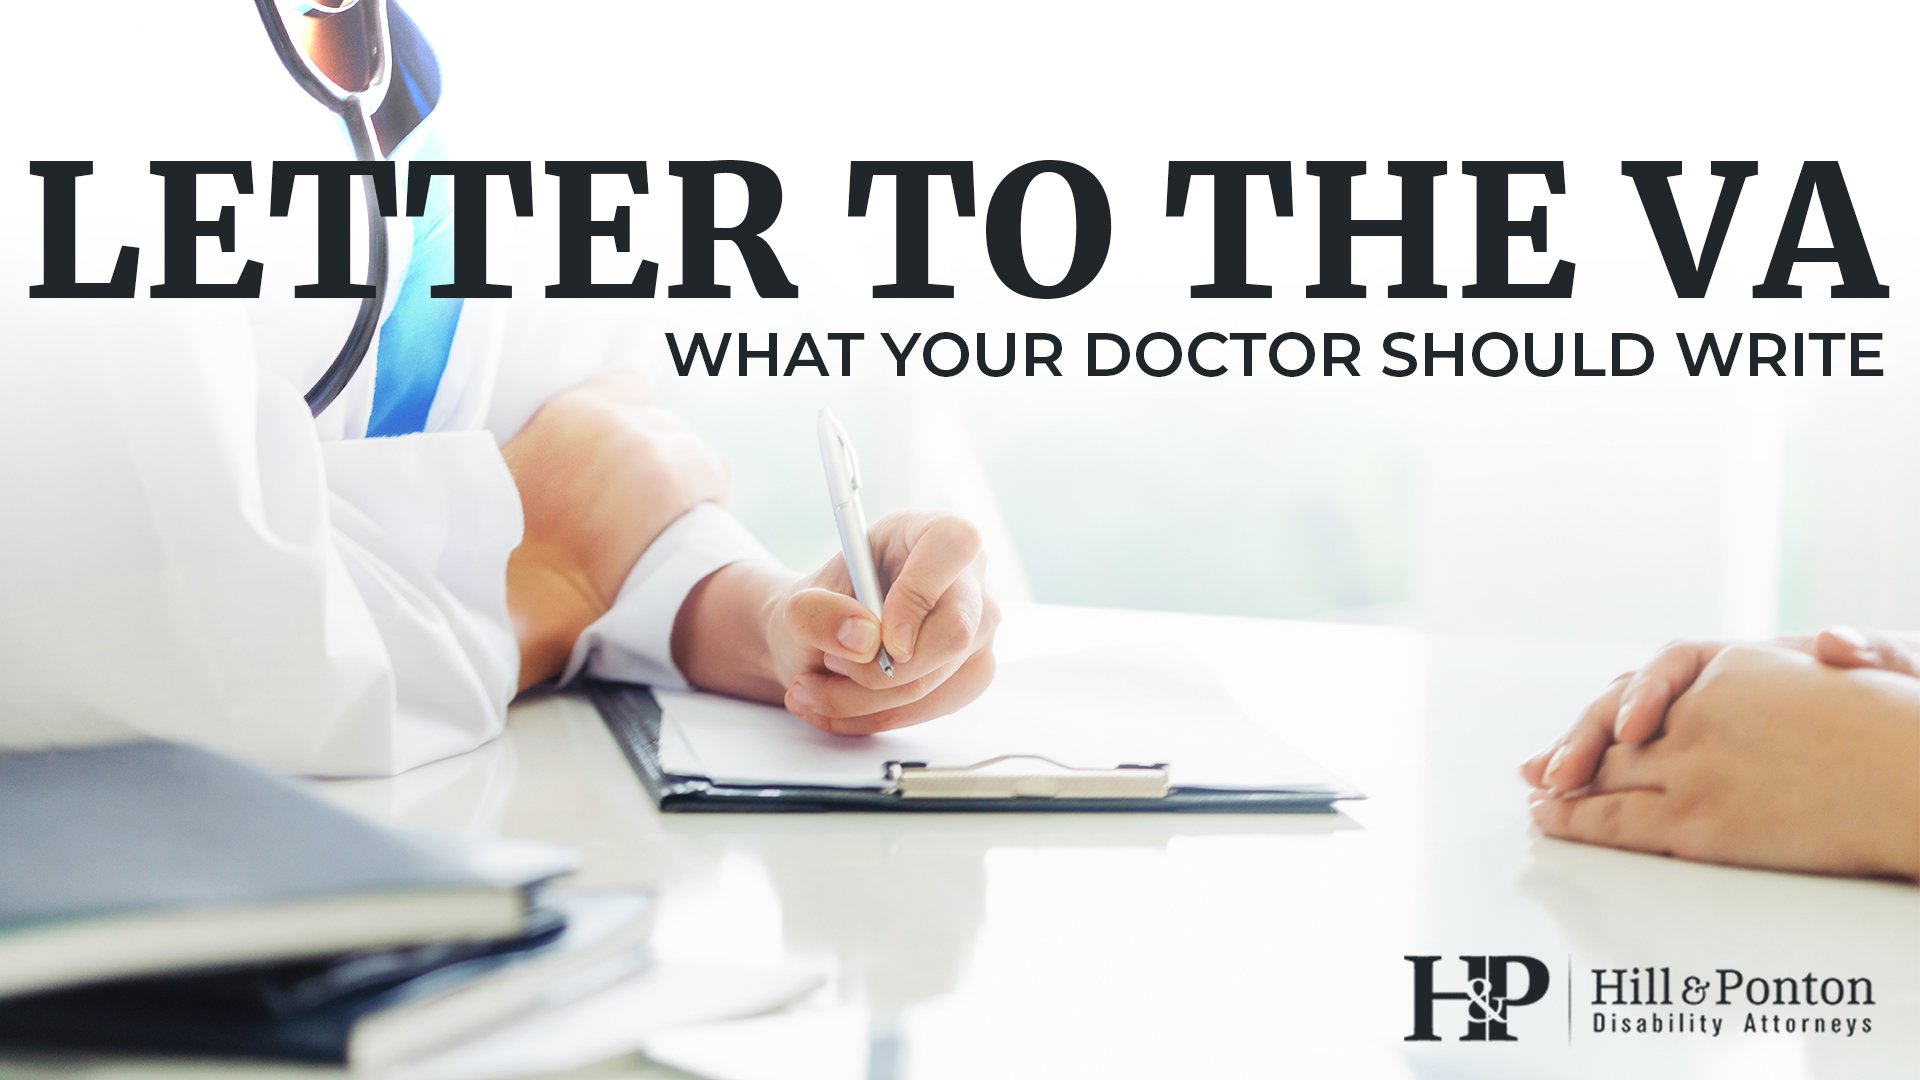 What Your Doctor Should Write in a Letter to the VA